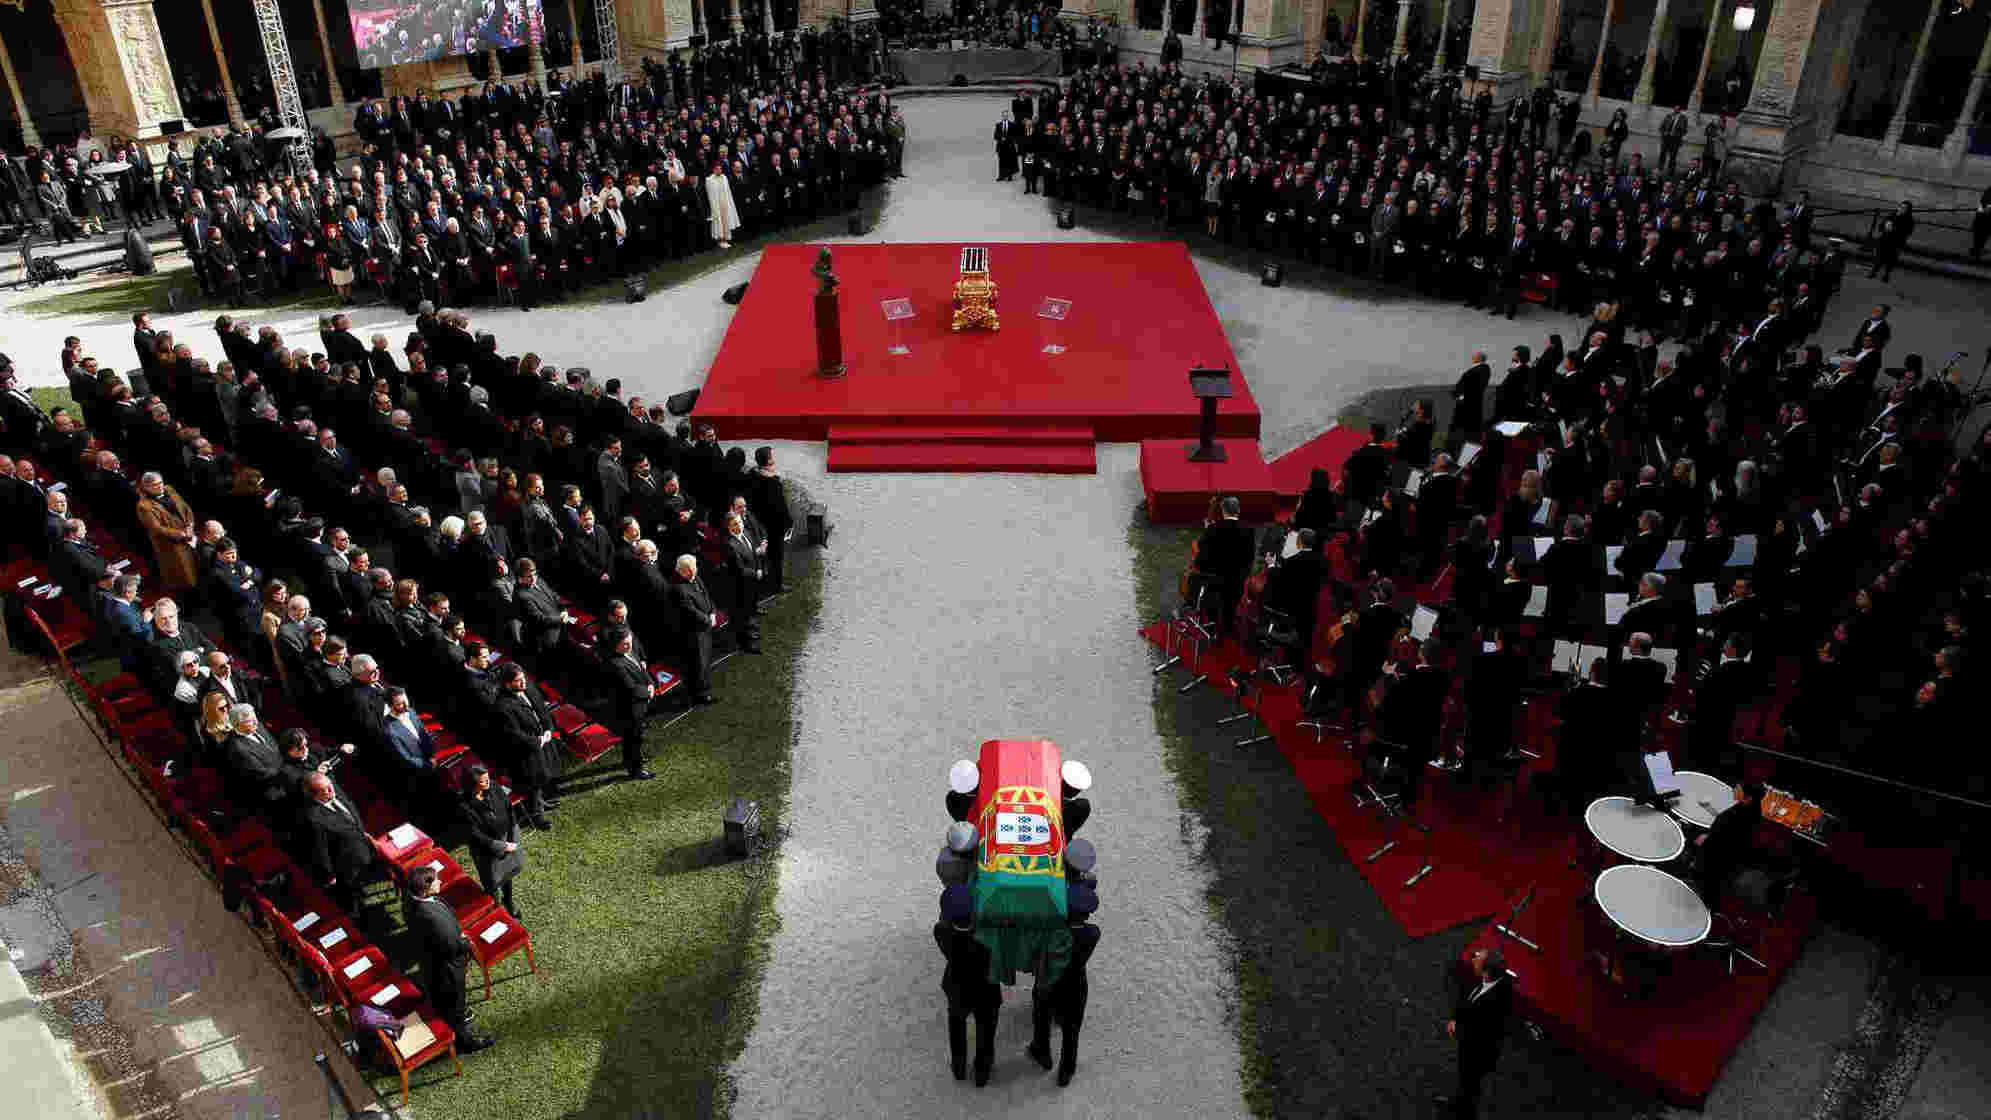 Portugal says farewell to “father of democracy” Mario Soares - CGTN